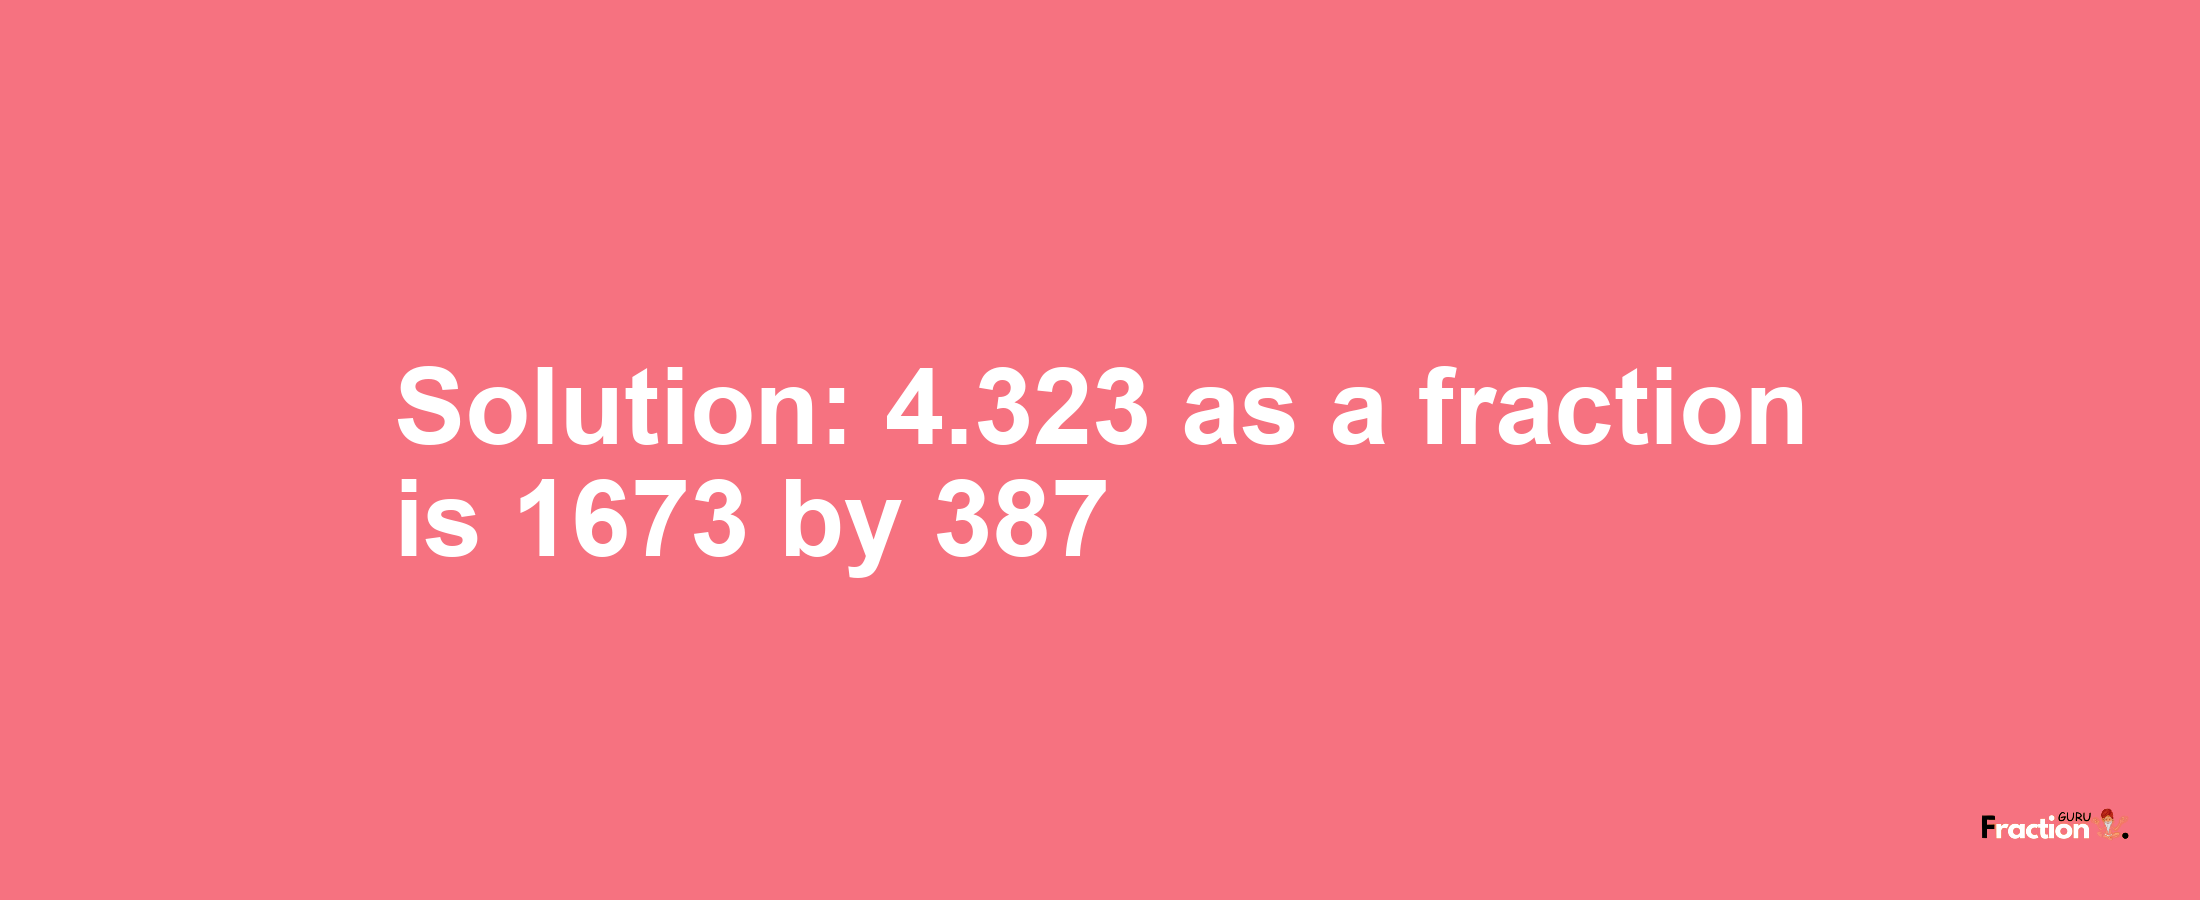 Solution:4.323 as a fraction is 1673/387